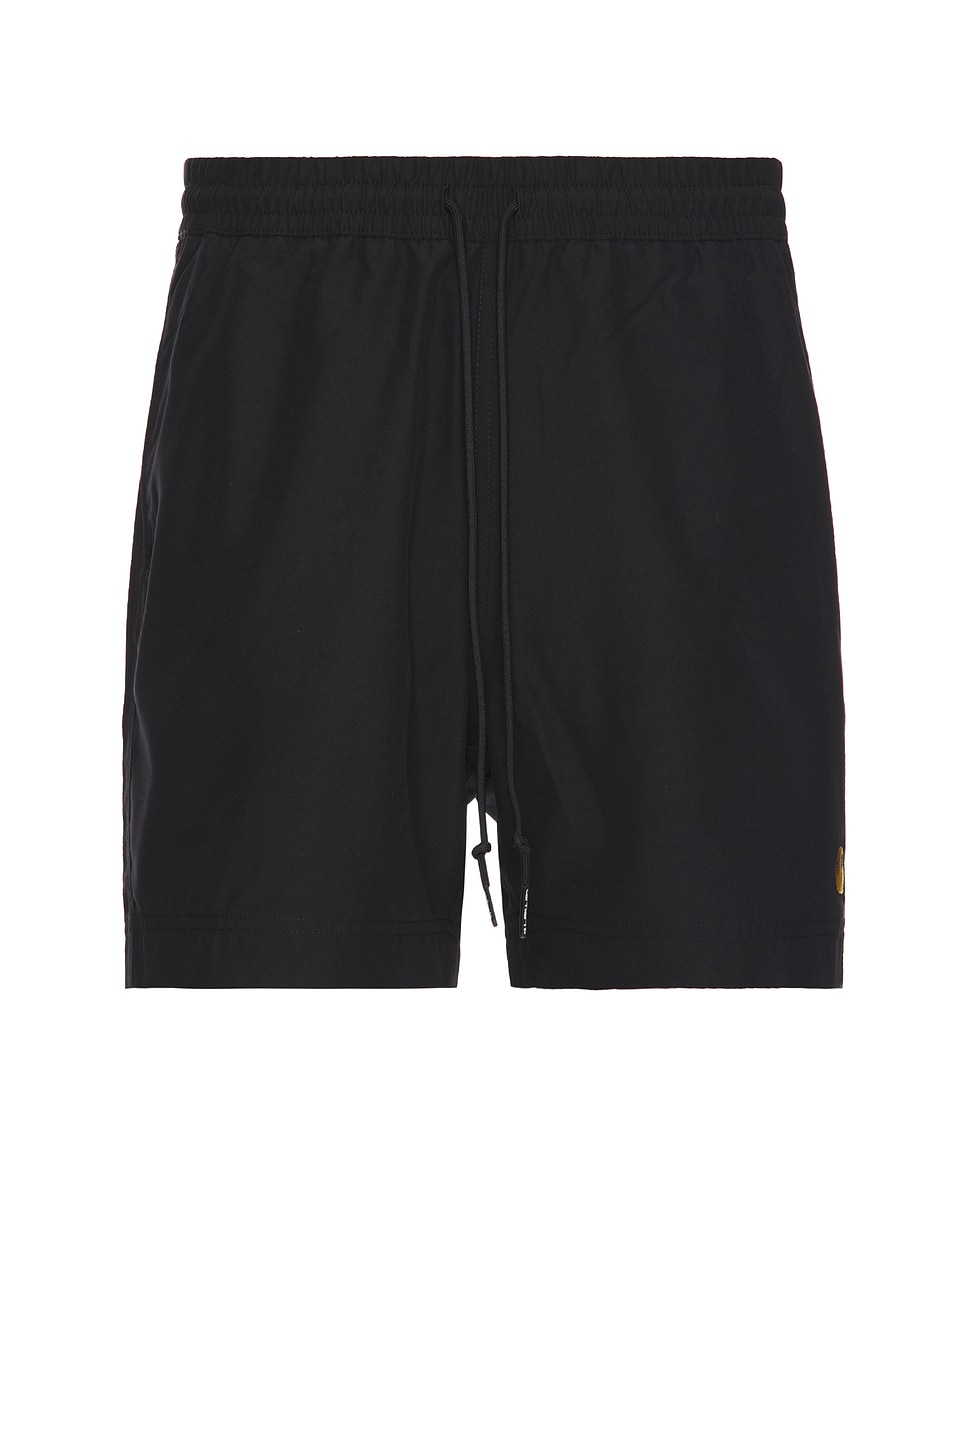 Image 1 of Carhartt WIP Chase Swim Trunks in Black & Gold